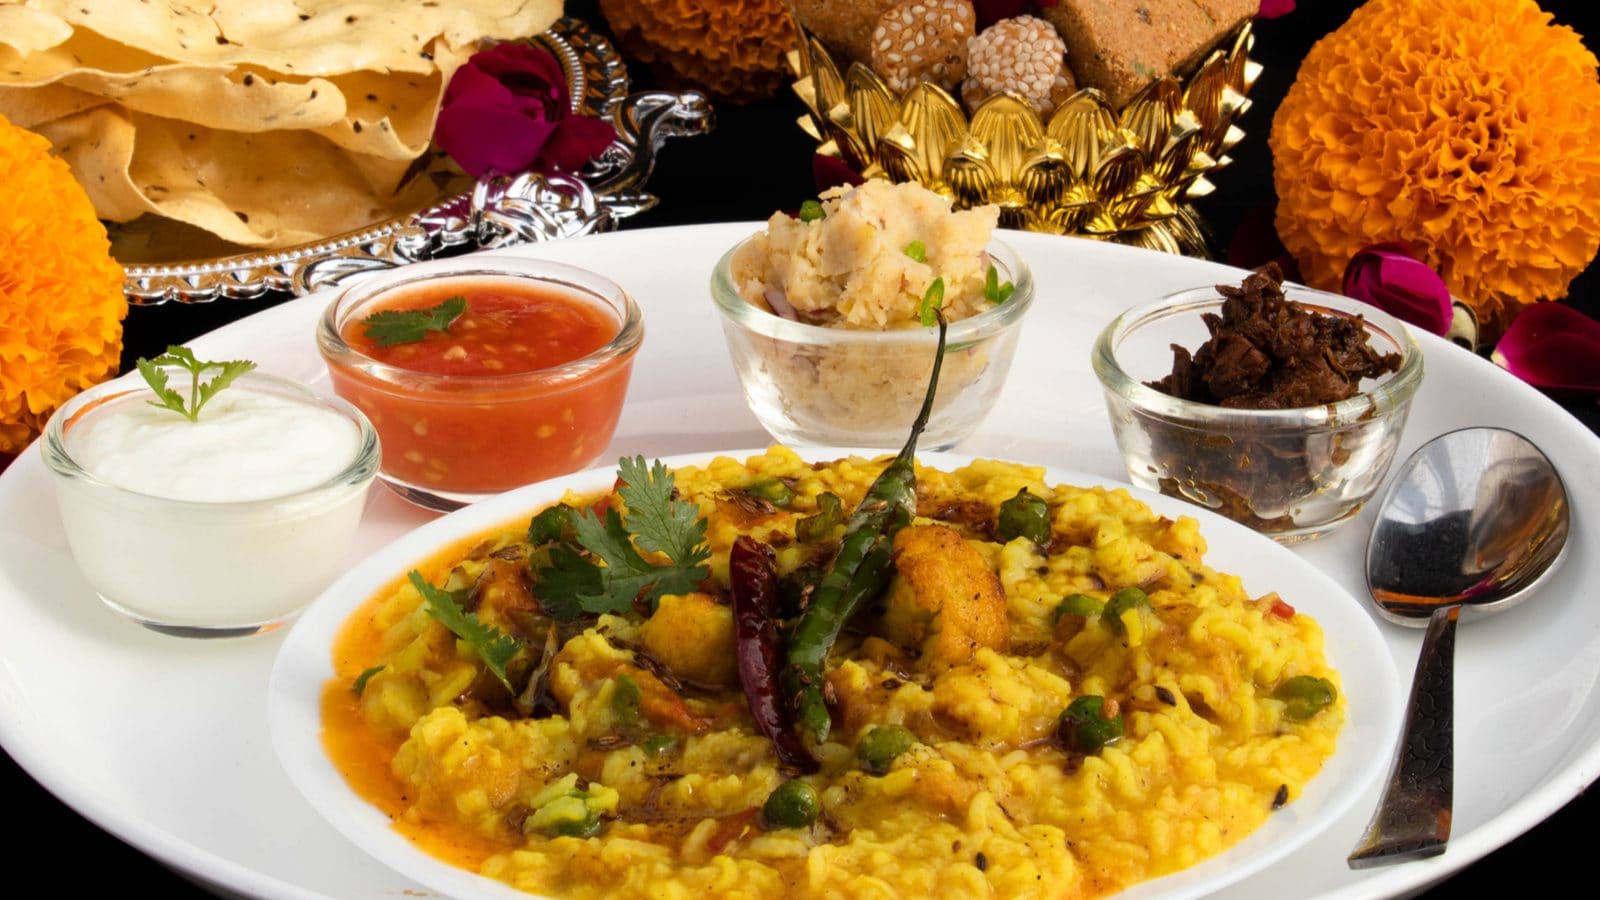 Makar Sankranti 2022: Here's How to Make 5 Types of Khichdi at Home for Good Luck | WATCH VIDEOS